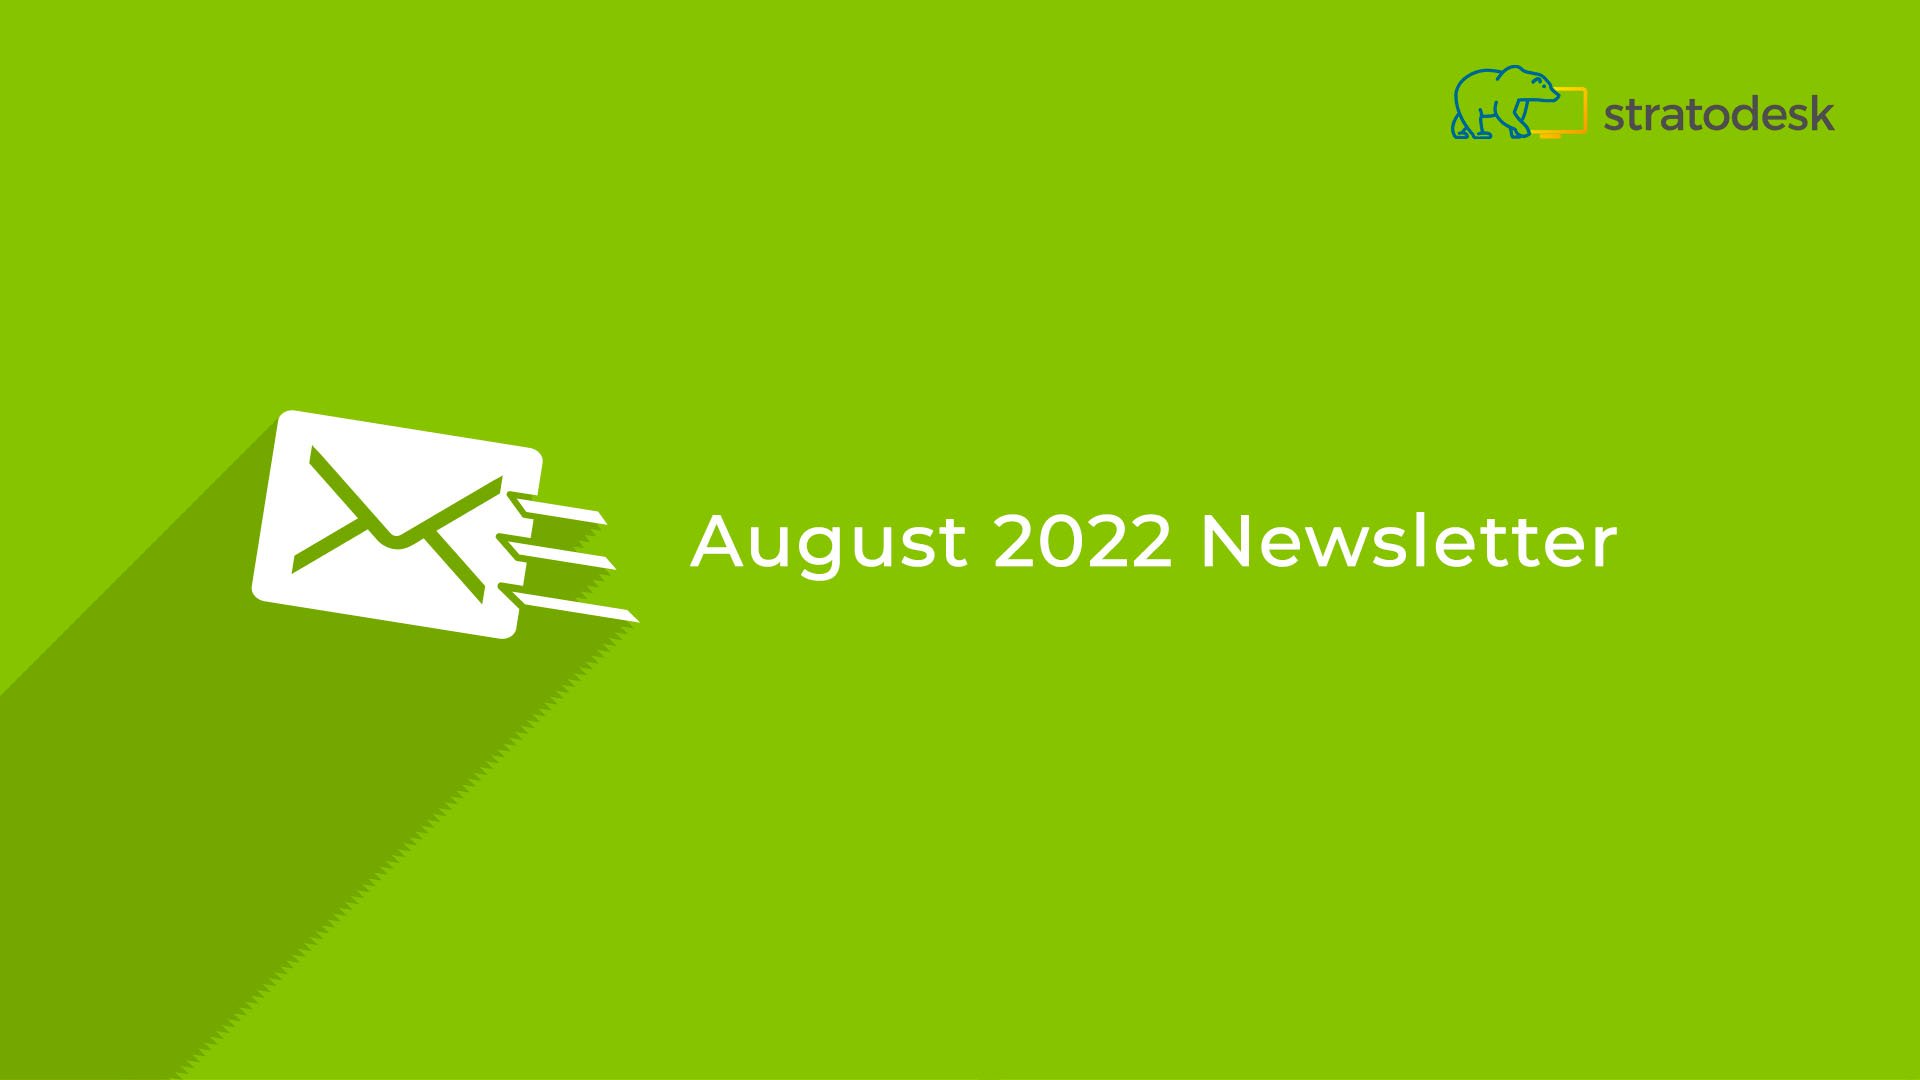 August newsletter, green background image with envelope icon